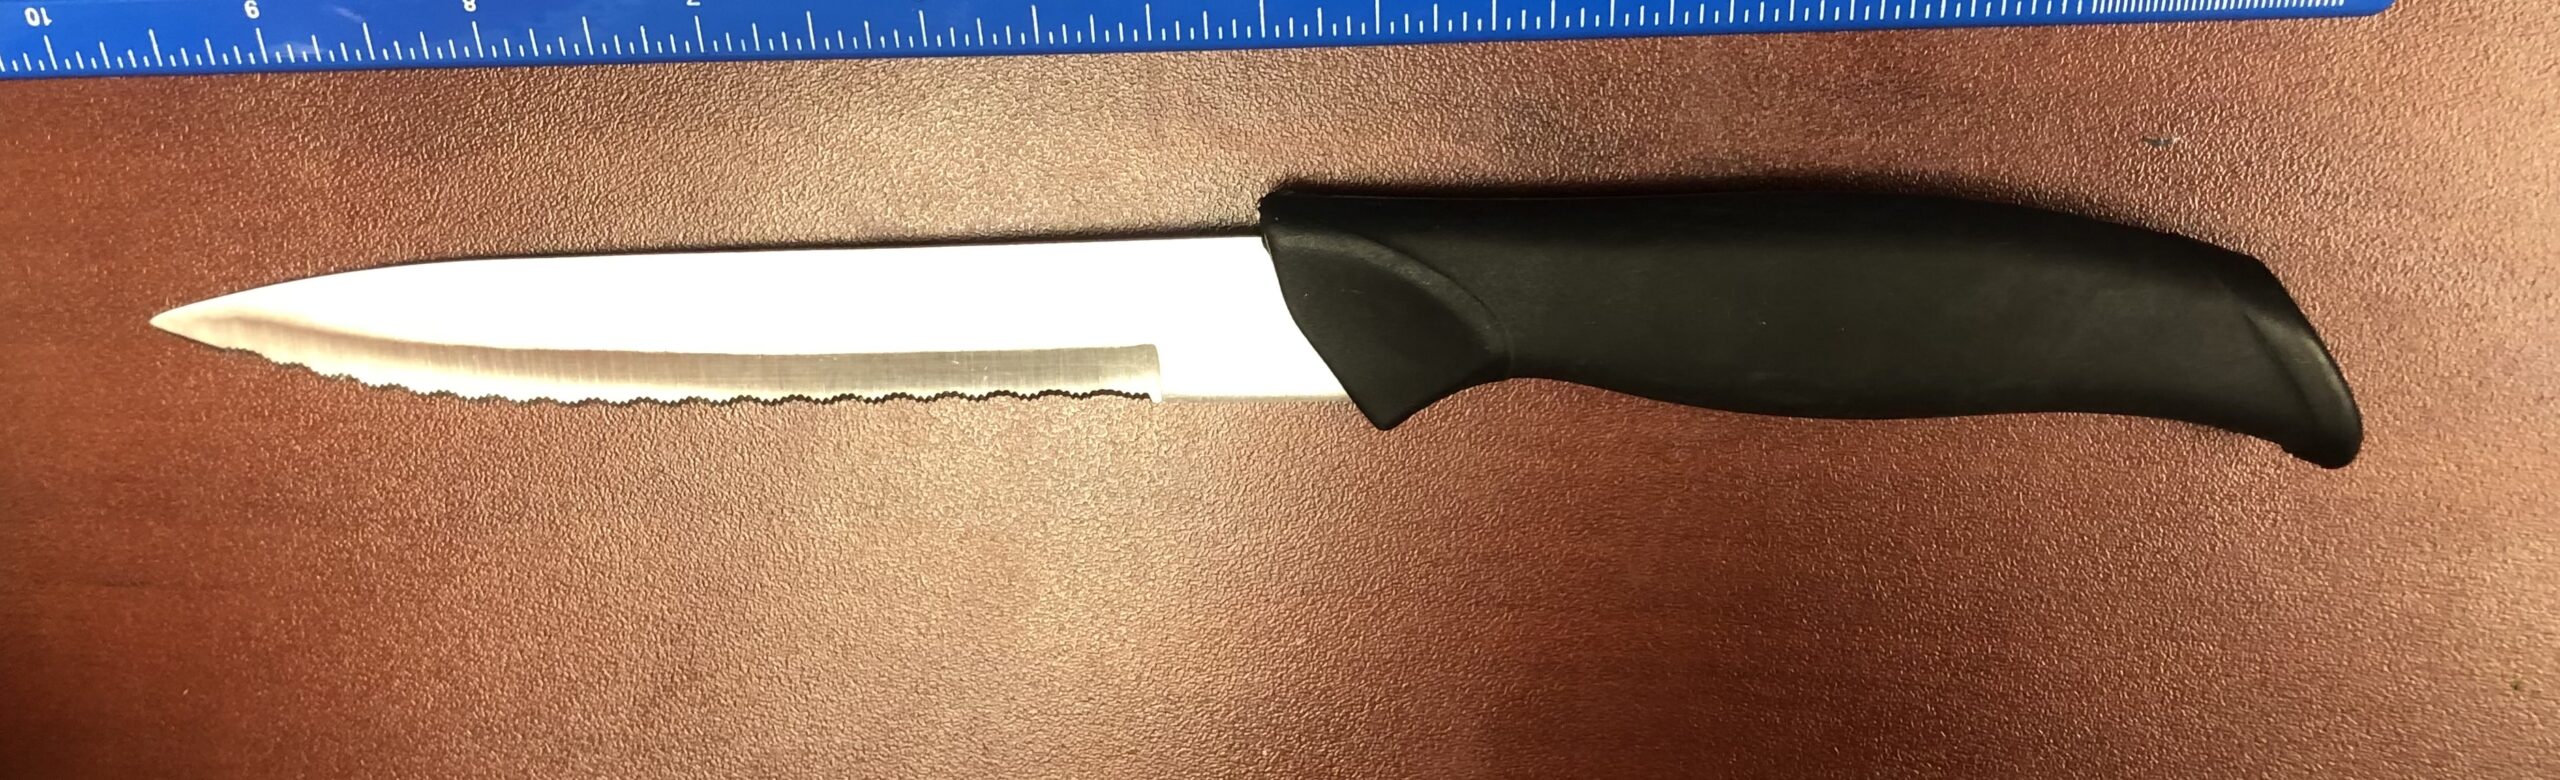 Knife-recovered-from-student-at-Davis-MS-041024-1-scaled.jpg